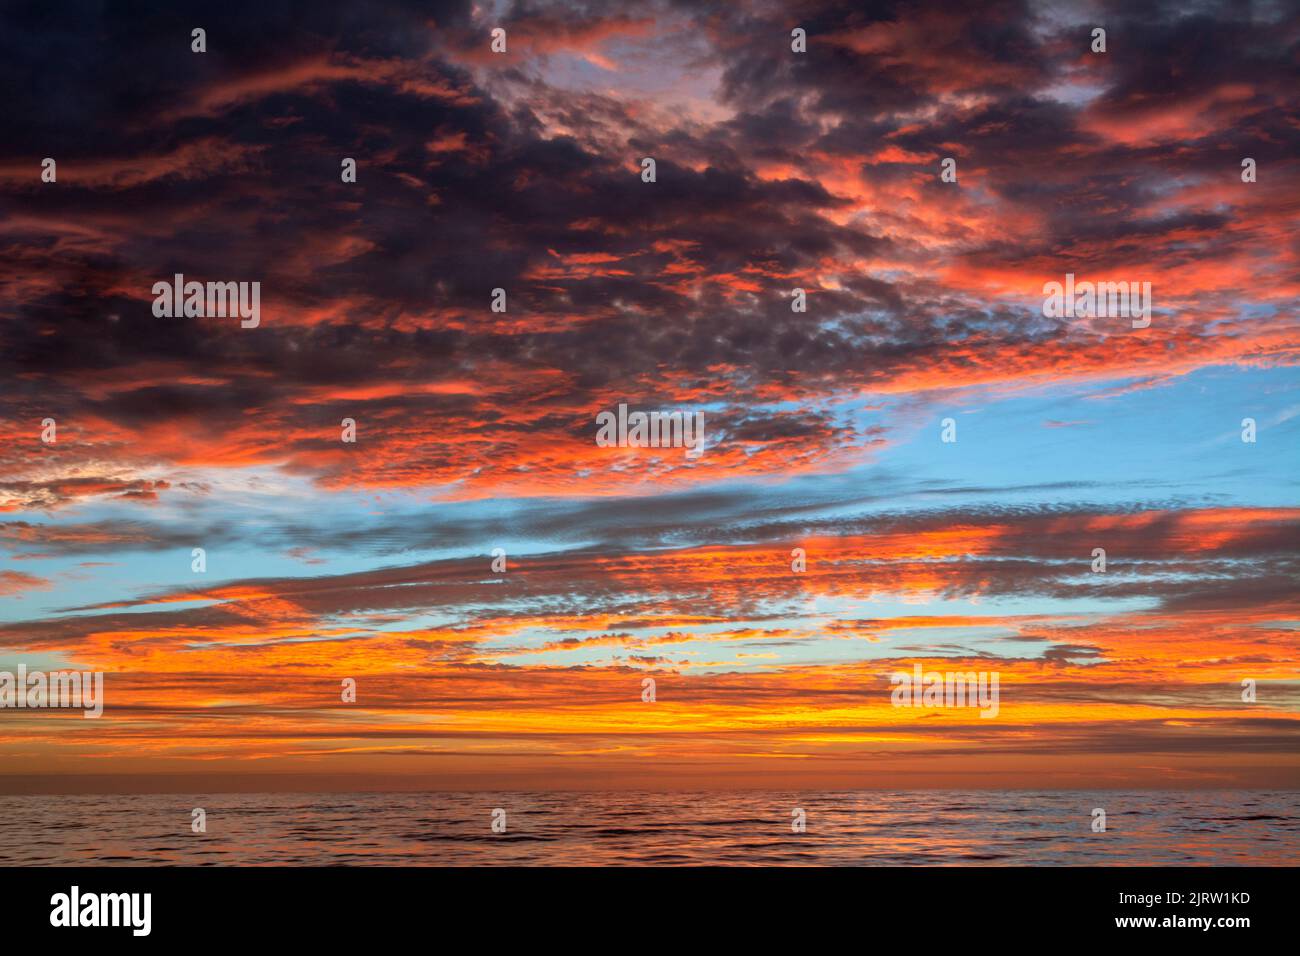 A beautiful and unusual sunset with dark clouds mixed with bright orange hints of sunlight over the Pacific ocean. Stock Photo